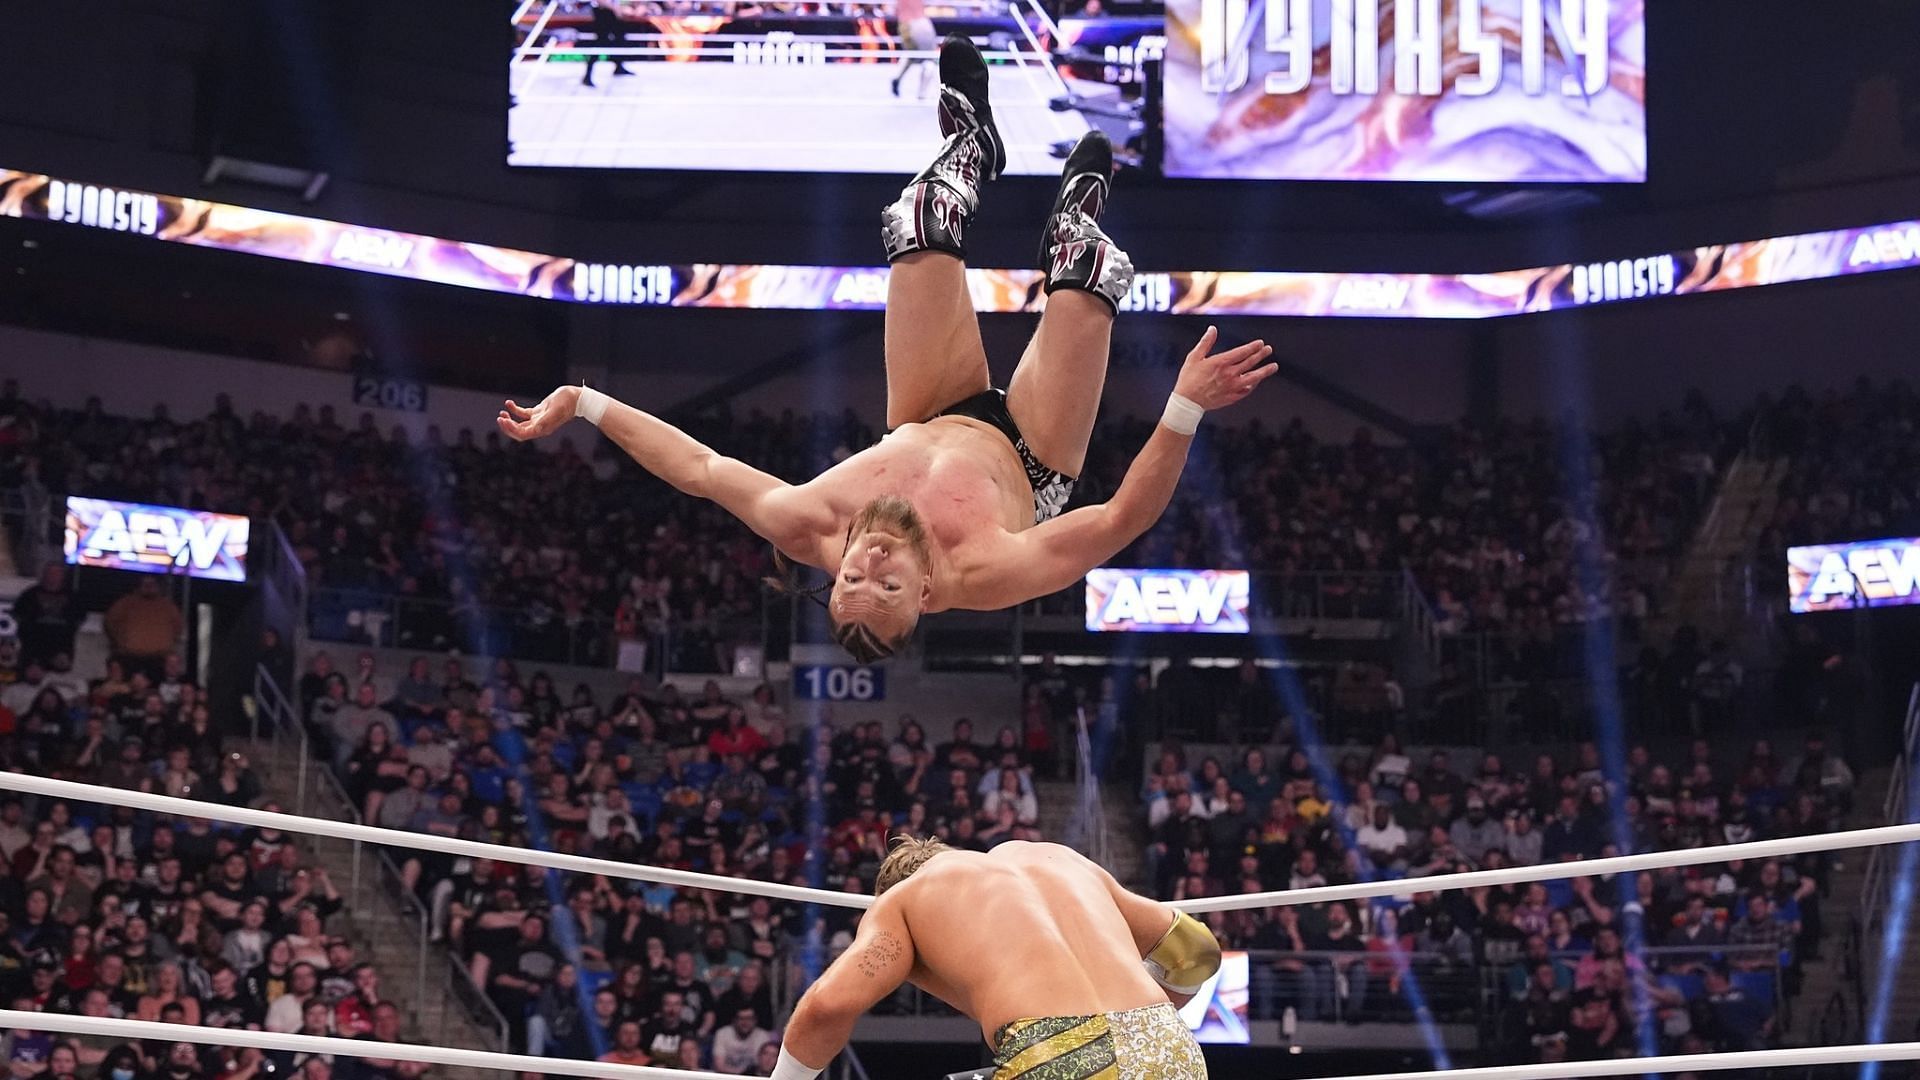 Bryan Danielson leaps over Will Ospreay at AEW Dynasty